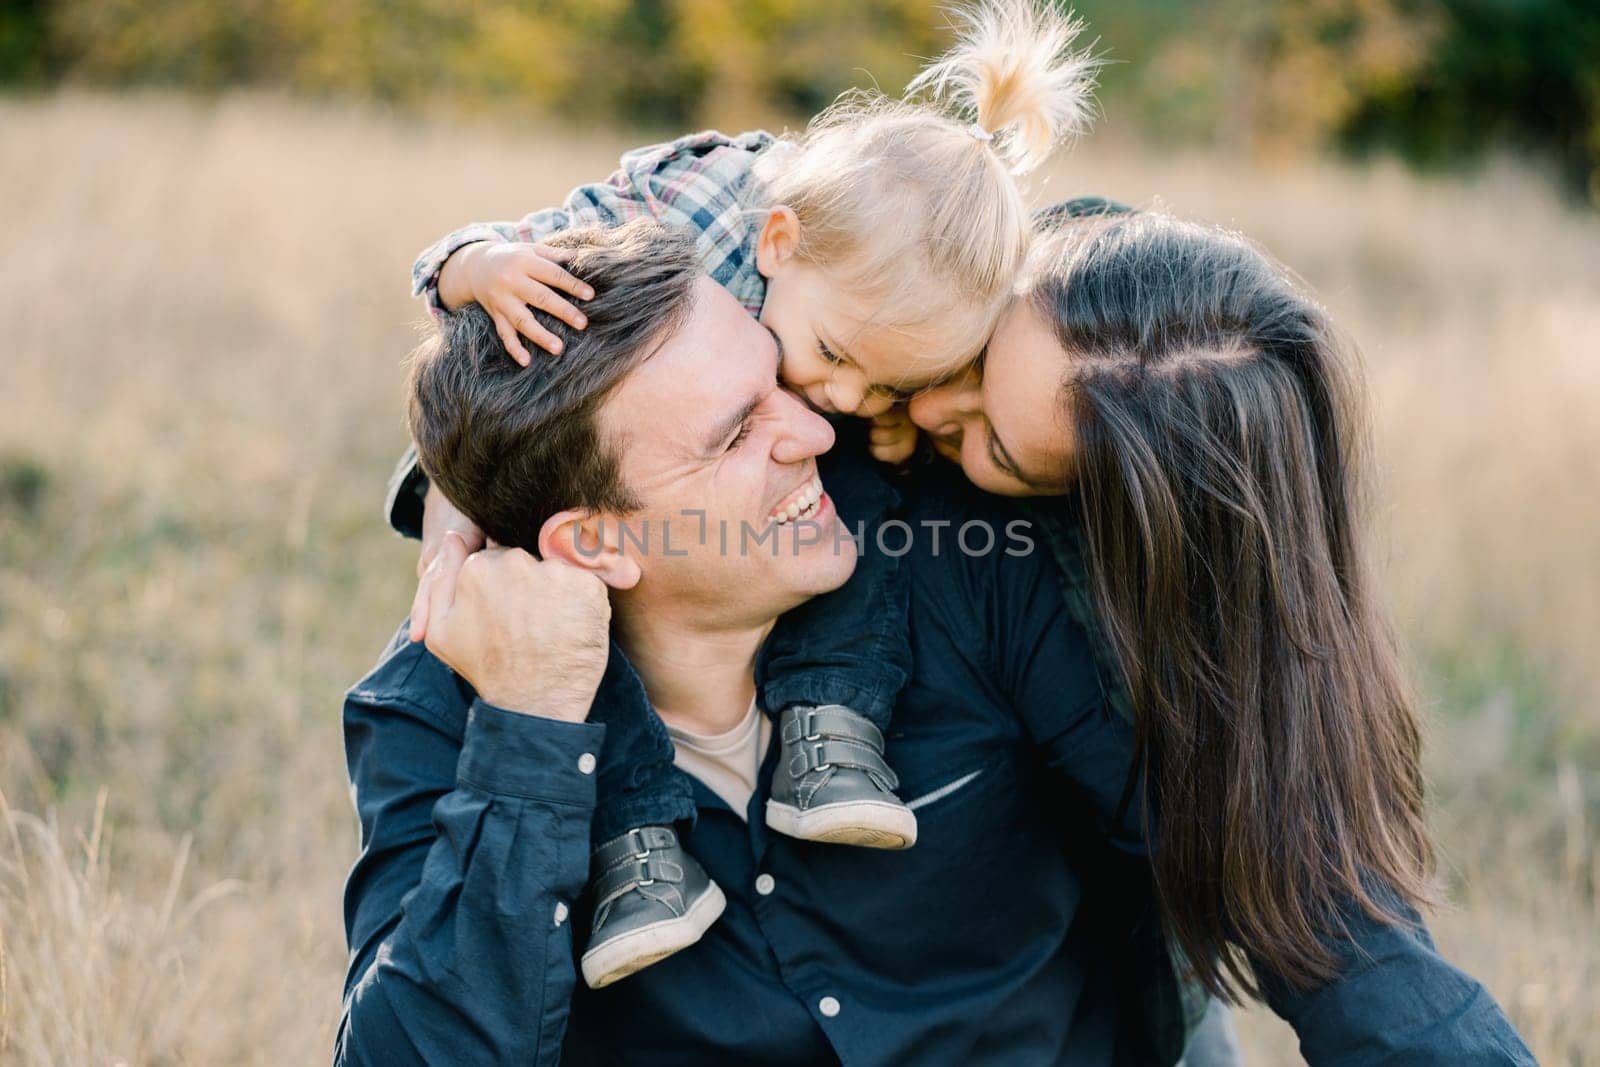 Mom with a little girl on the shoulders of dad kiss him, hugging from behind. High quality photo